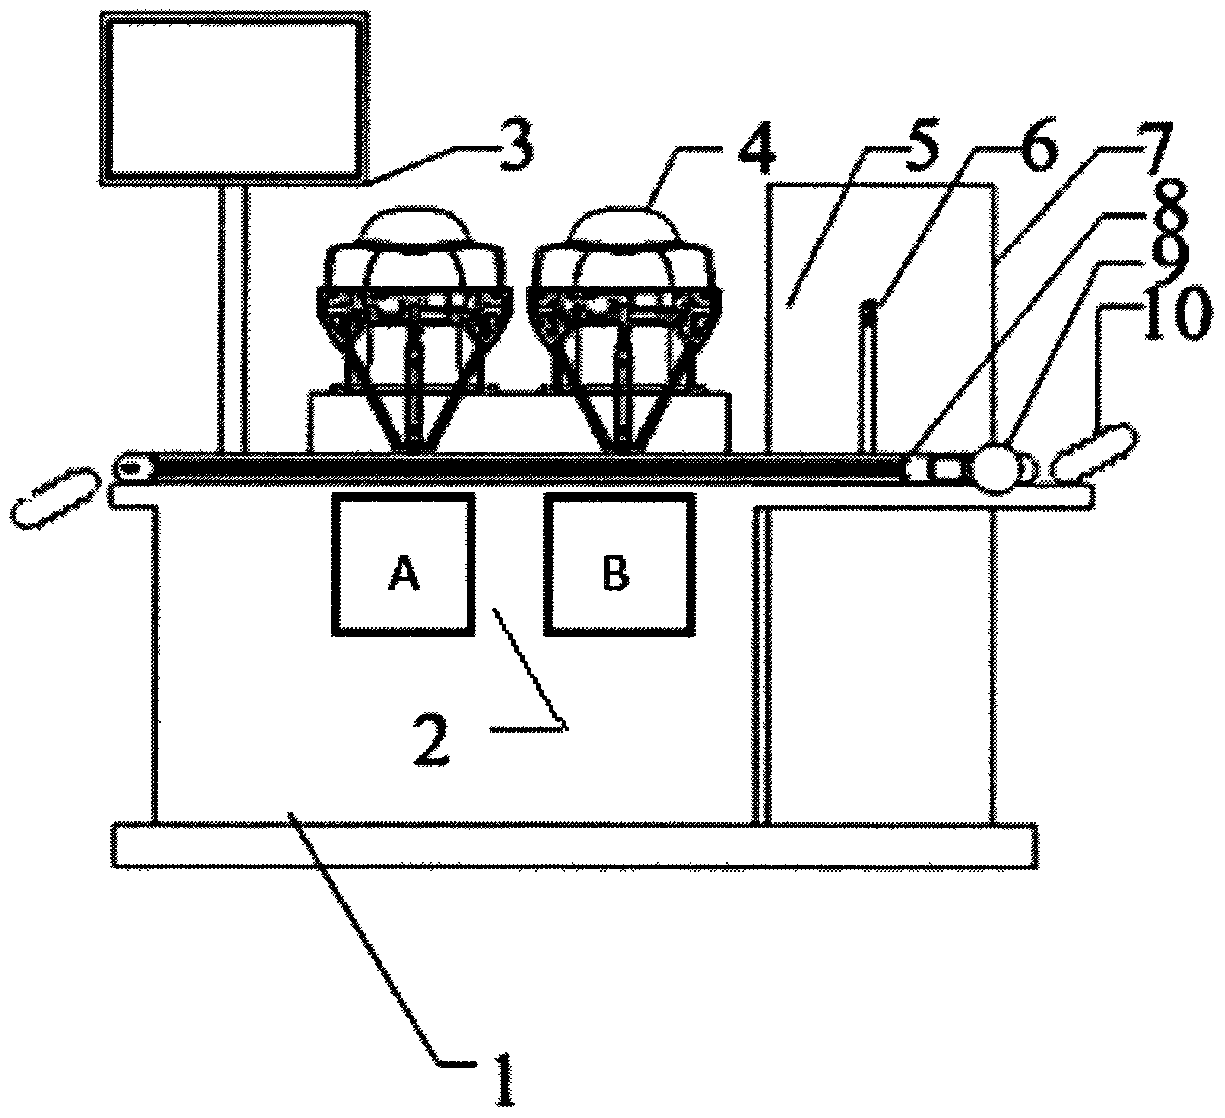 Eyedrop bottle sorting and casing system and method